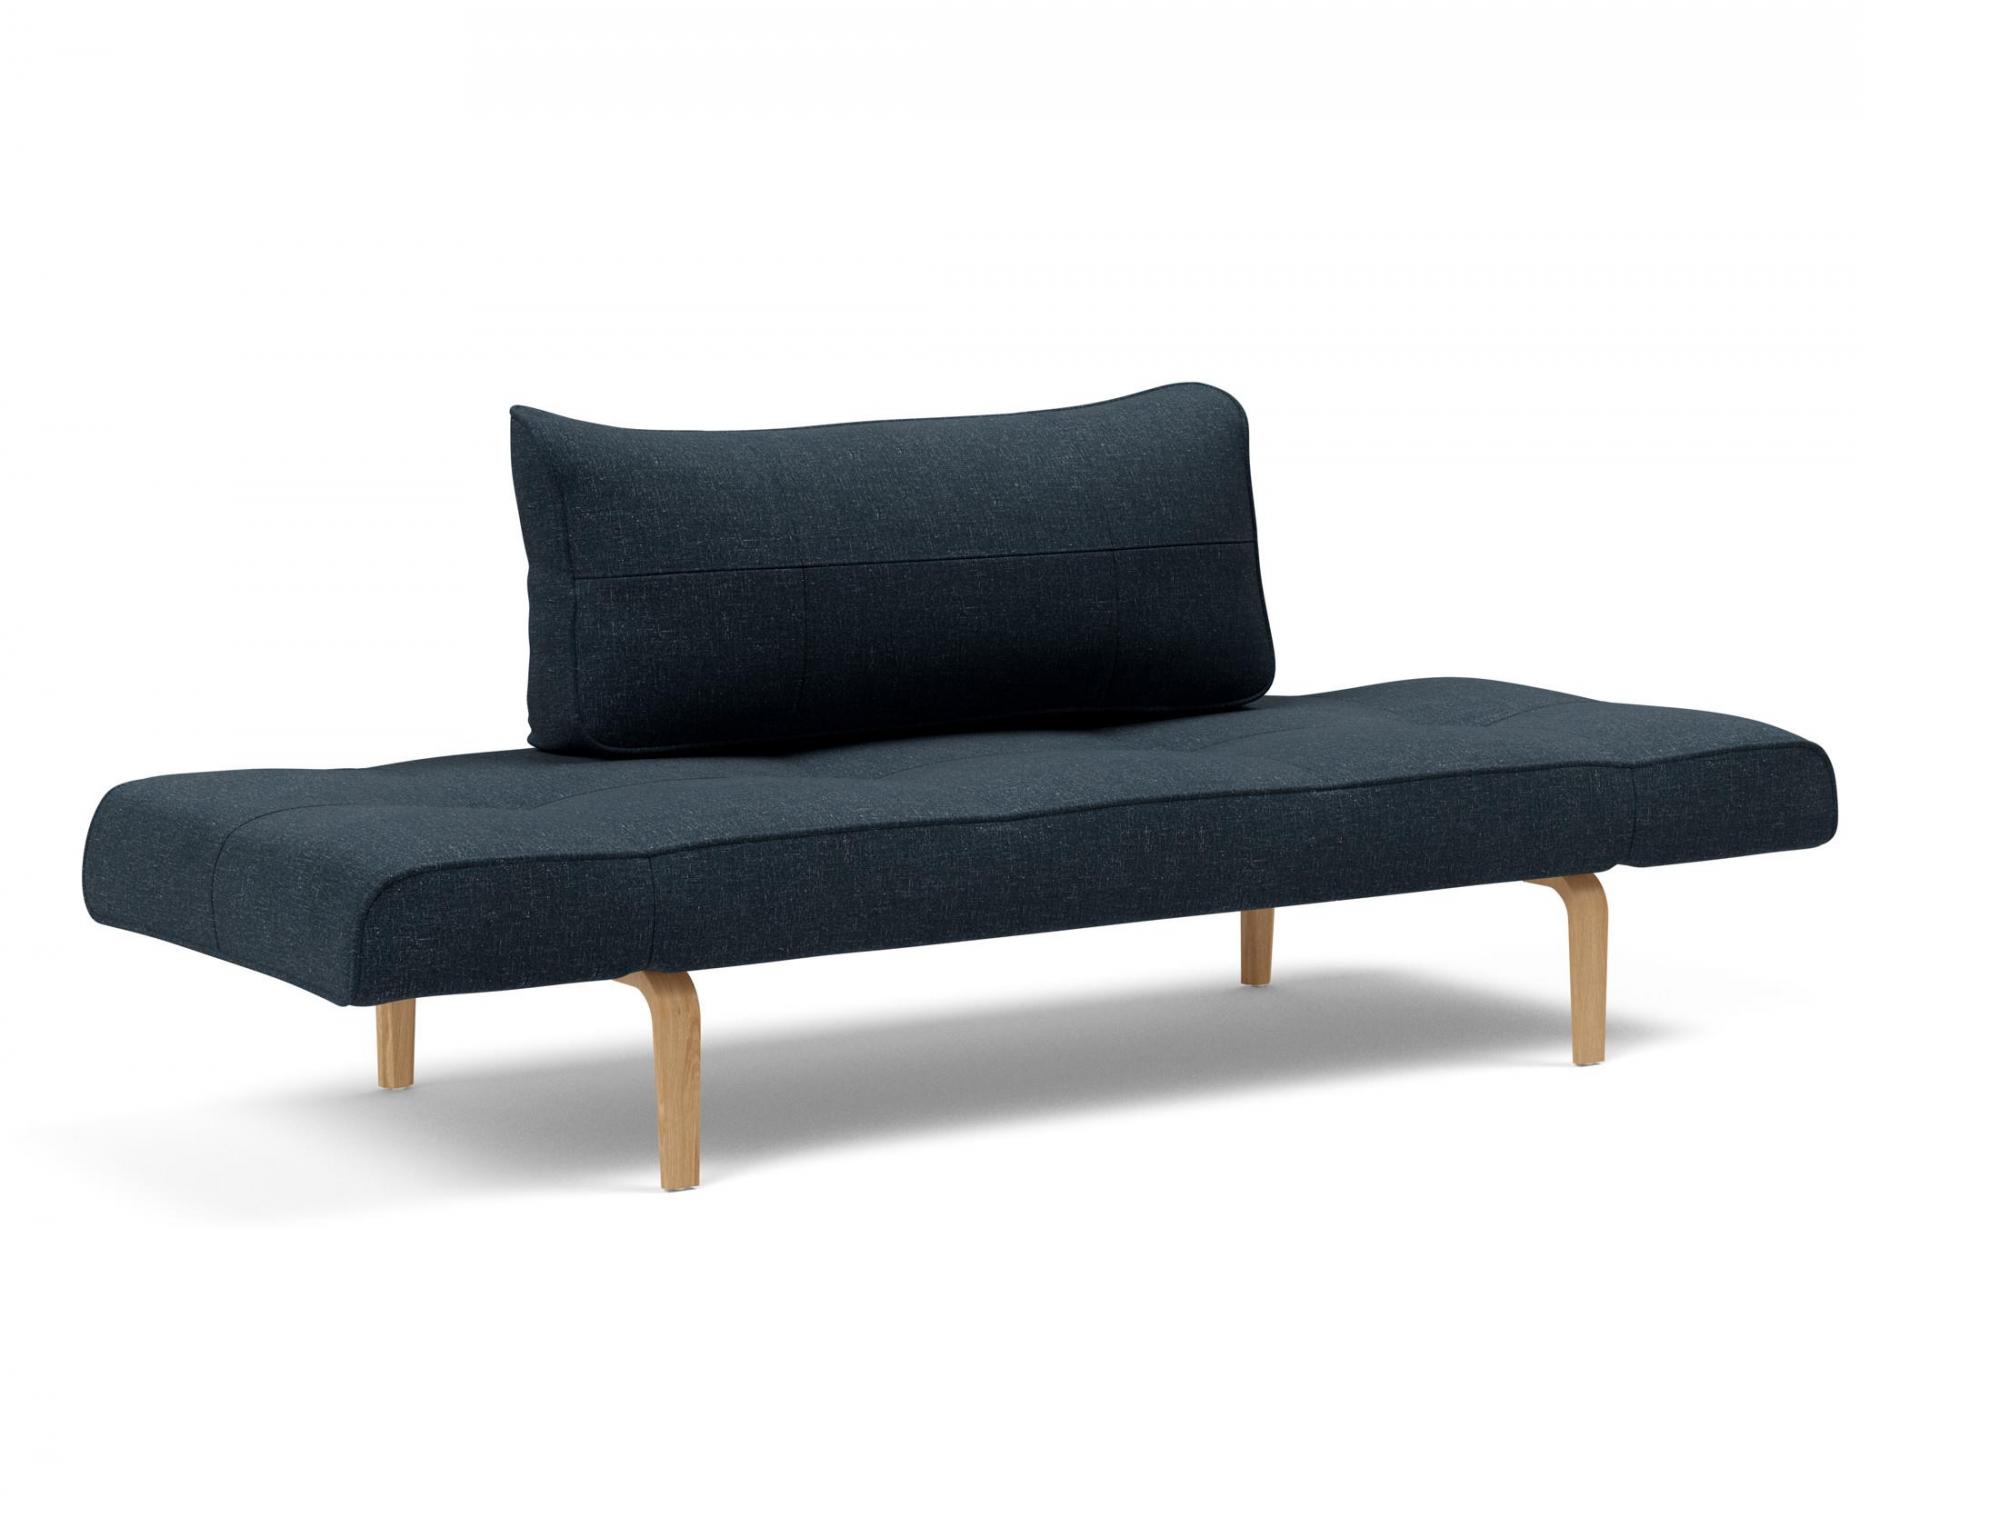 Zeal Sofas - Liege/Daybed Innovation Liege/Daybed